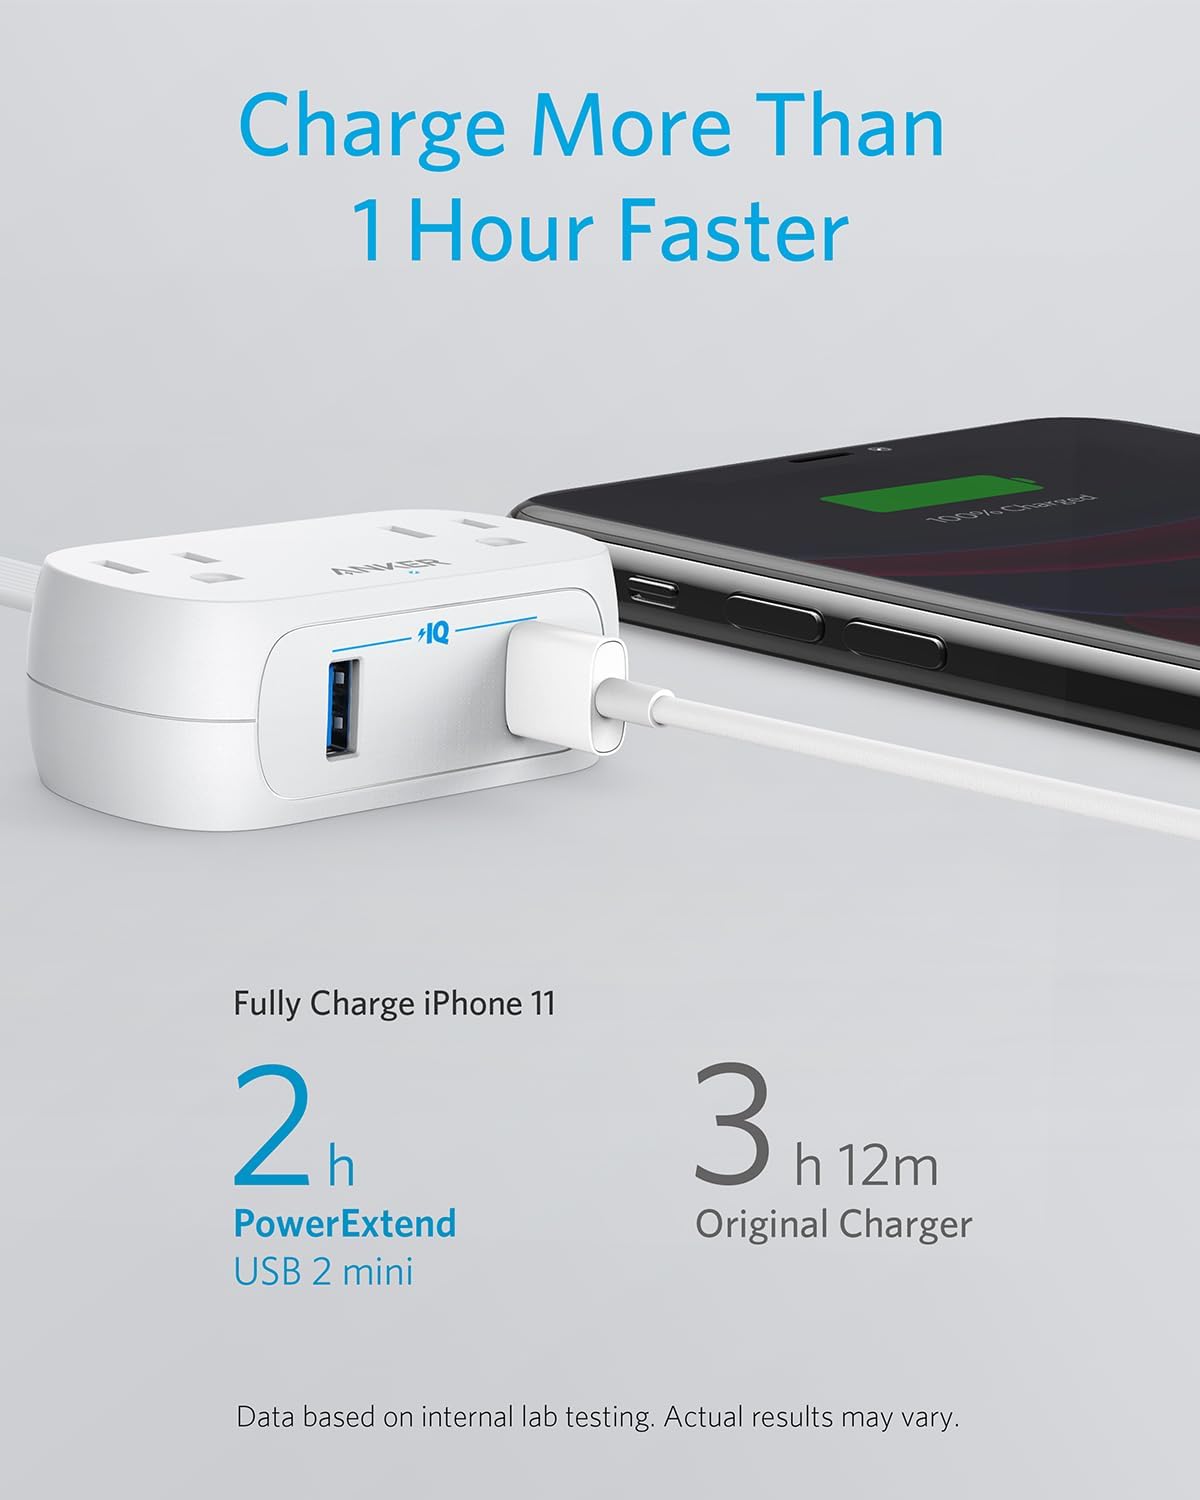 Anker USB Power Strip, Small Power Strip with 2 Outlets and 2 USB Charger, 5 ft Thin Cord and Flat Plug